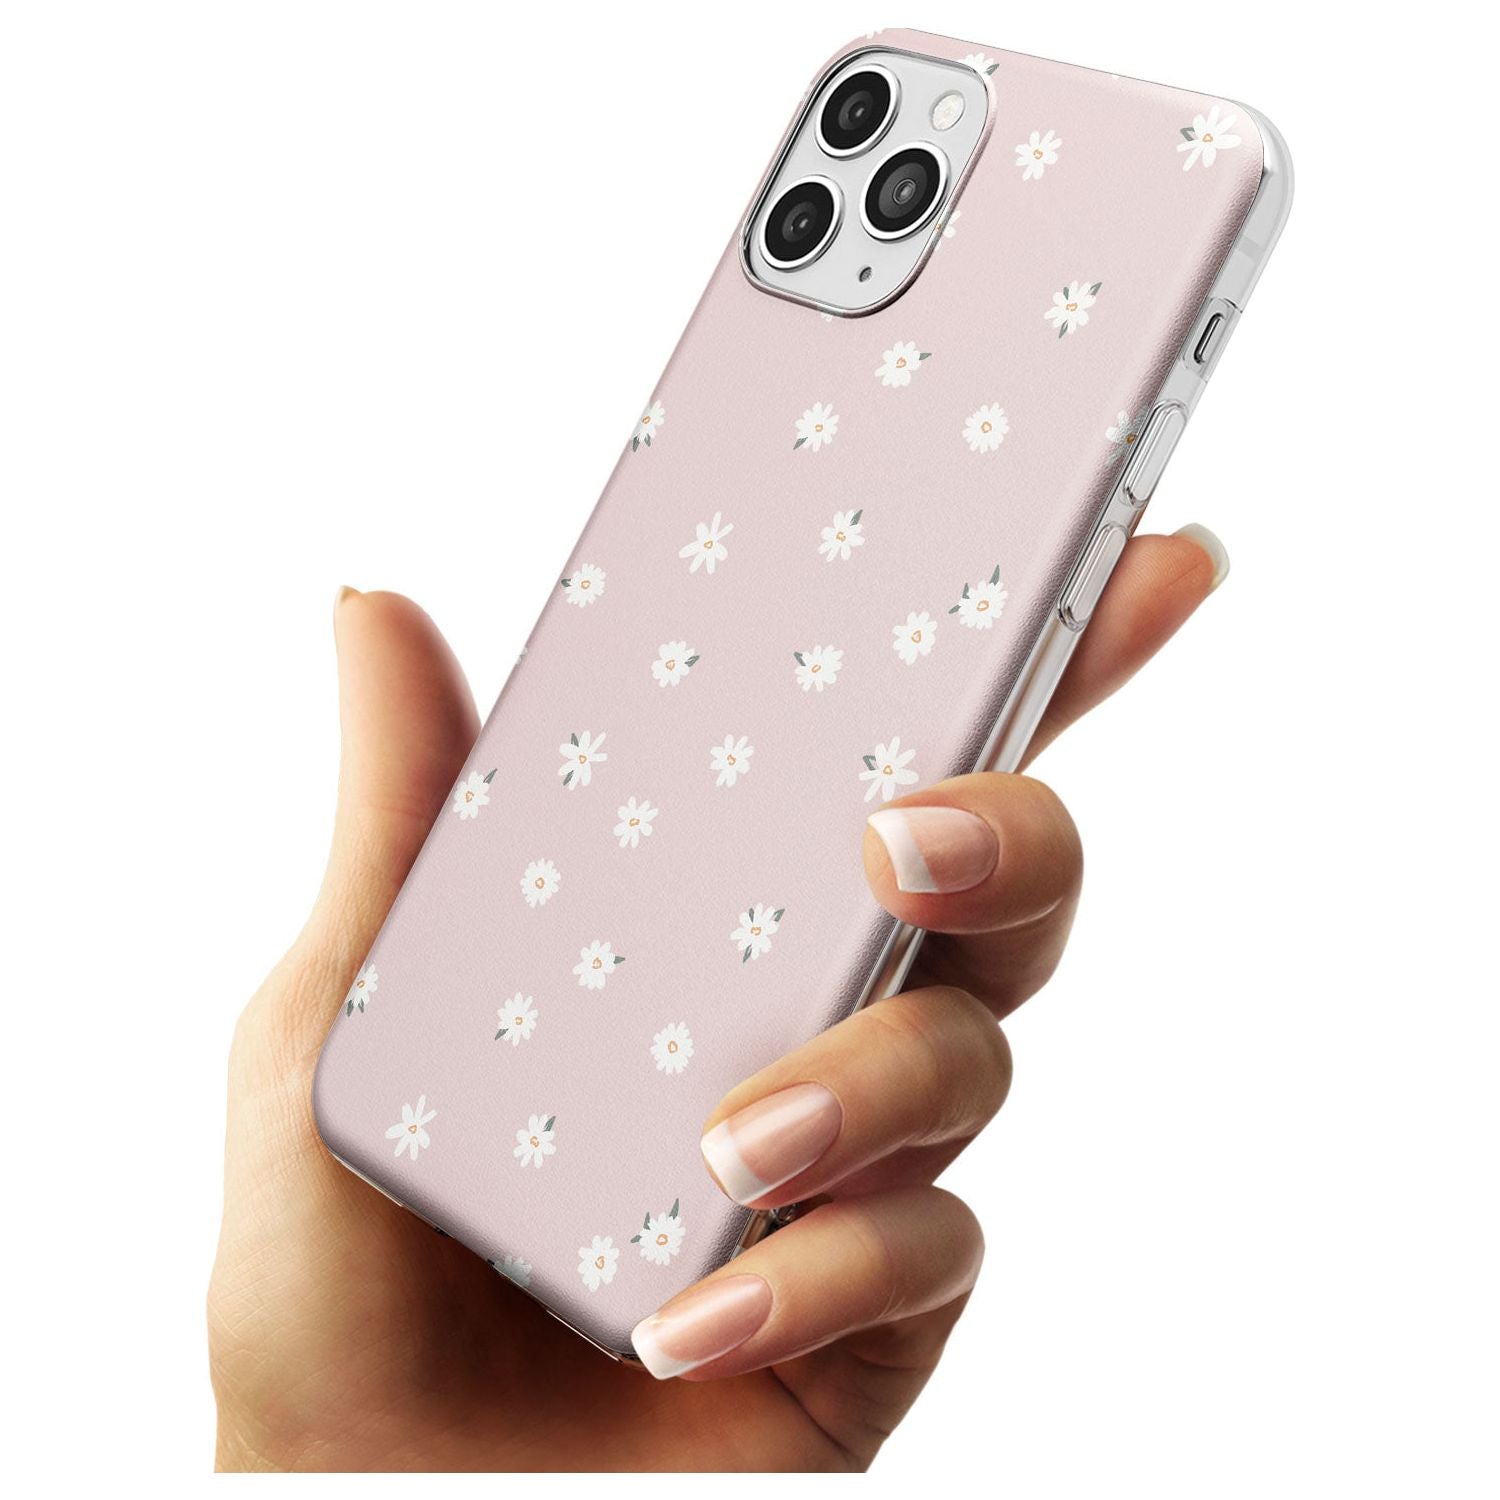 Painted Daises on Pink - Cute Floral Daisy Design Black Impact Phone Case for iPhone 11 Pro Max